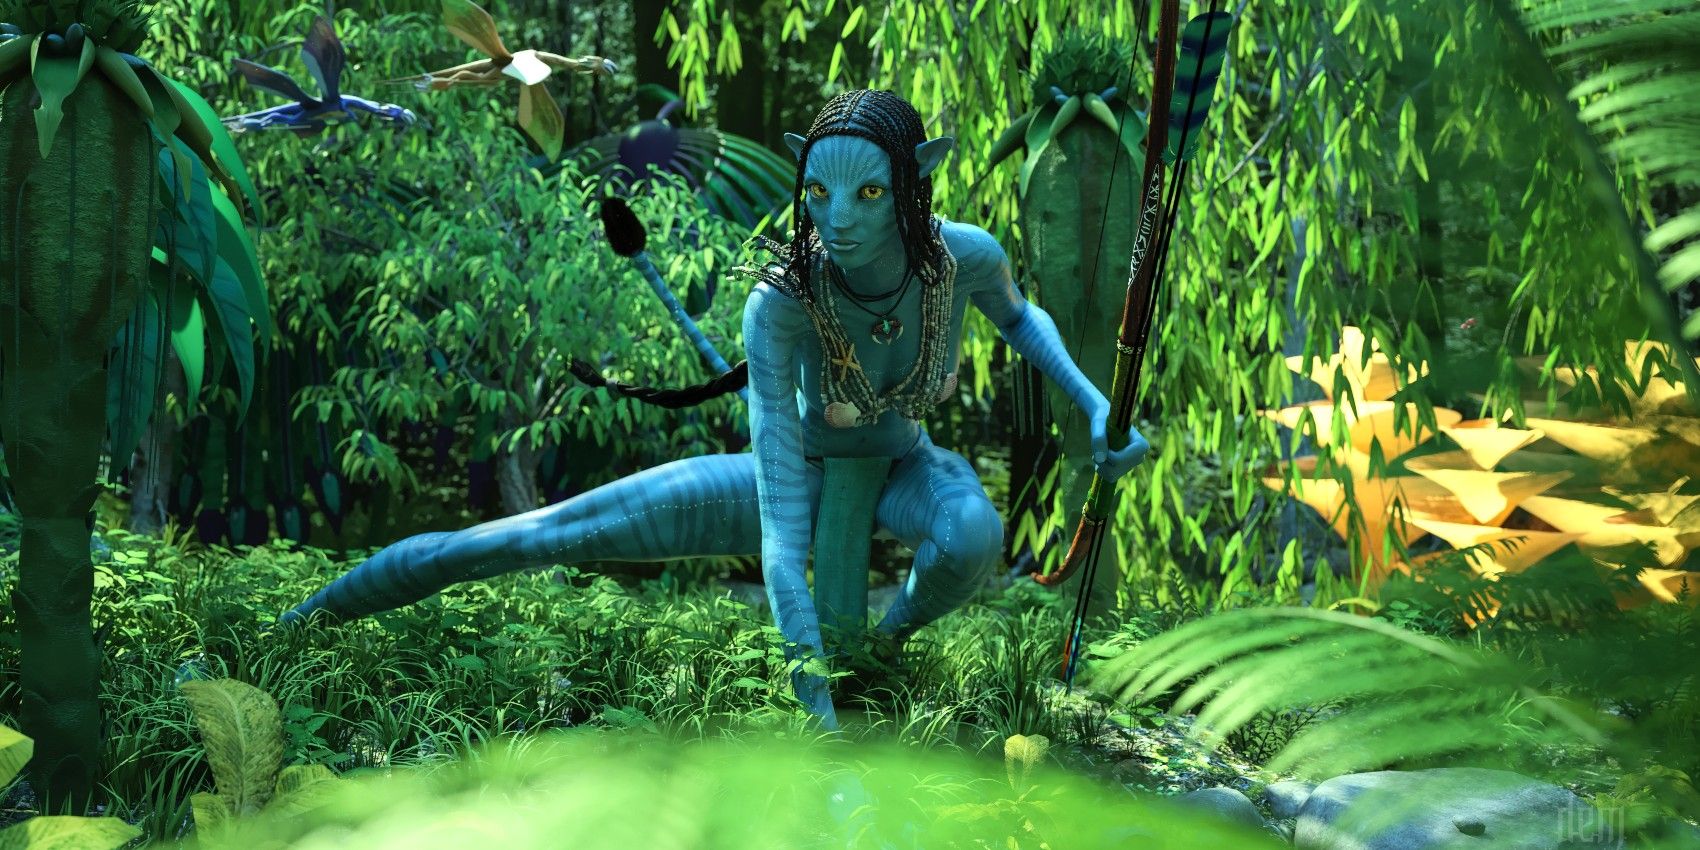 Avatar The Way Of Waters Jungle Scenes Were A Challenge For The Films  VFX Team Exclusive